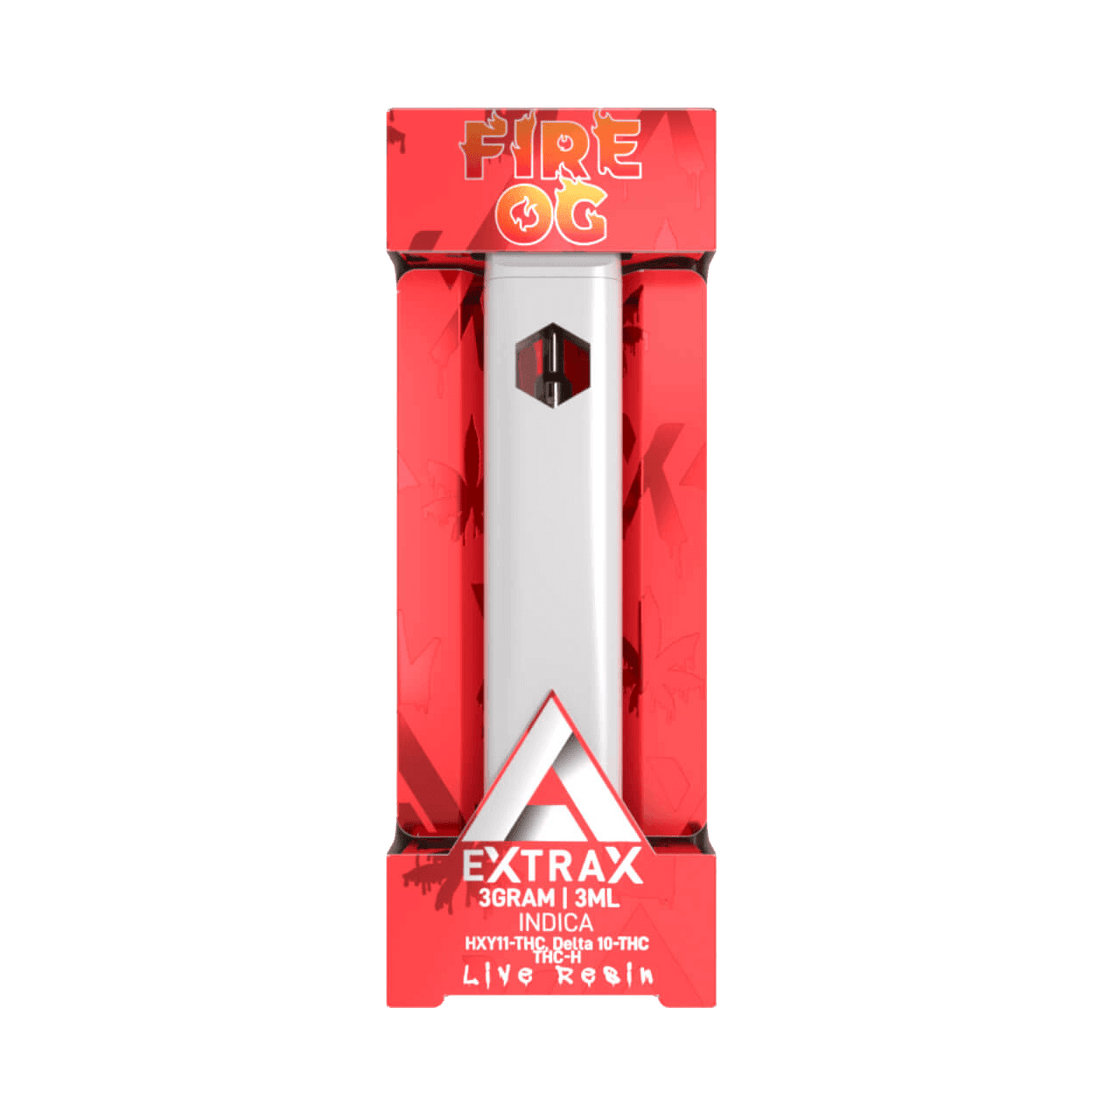 EXTRAX HXY11-THC, DELTA 10-THC THC-H (3GM) LIVE RESIN DISPOSABLE